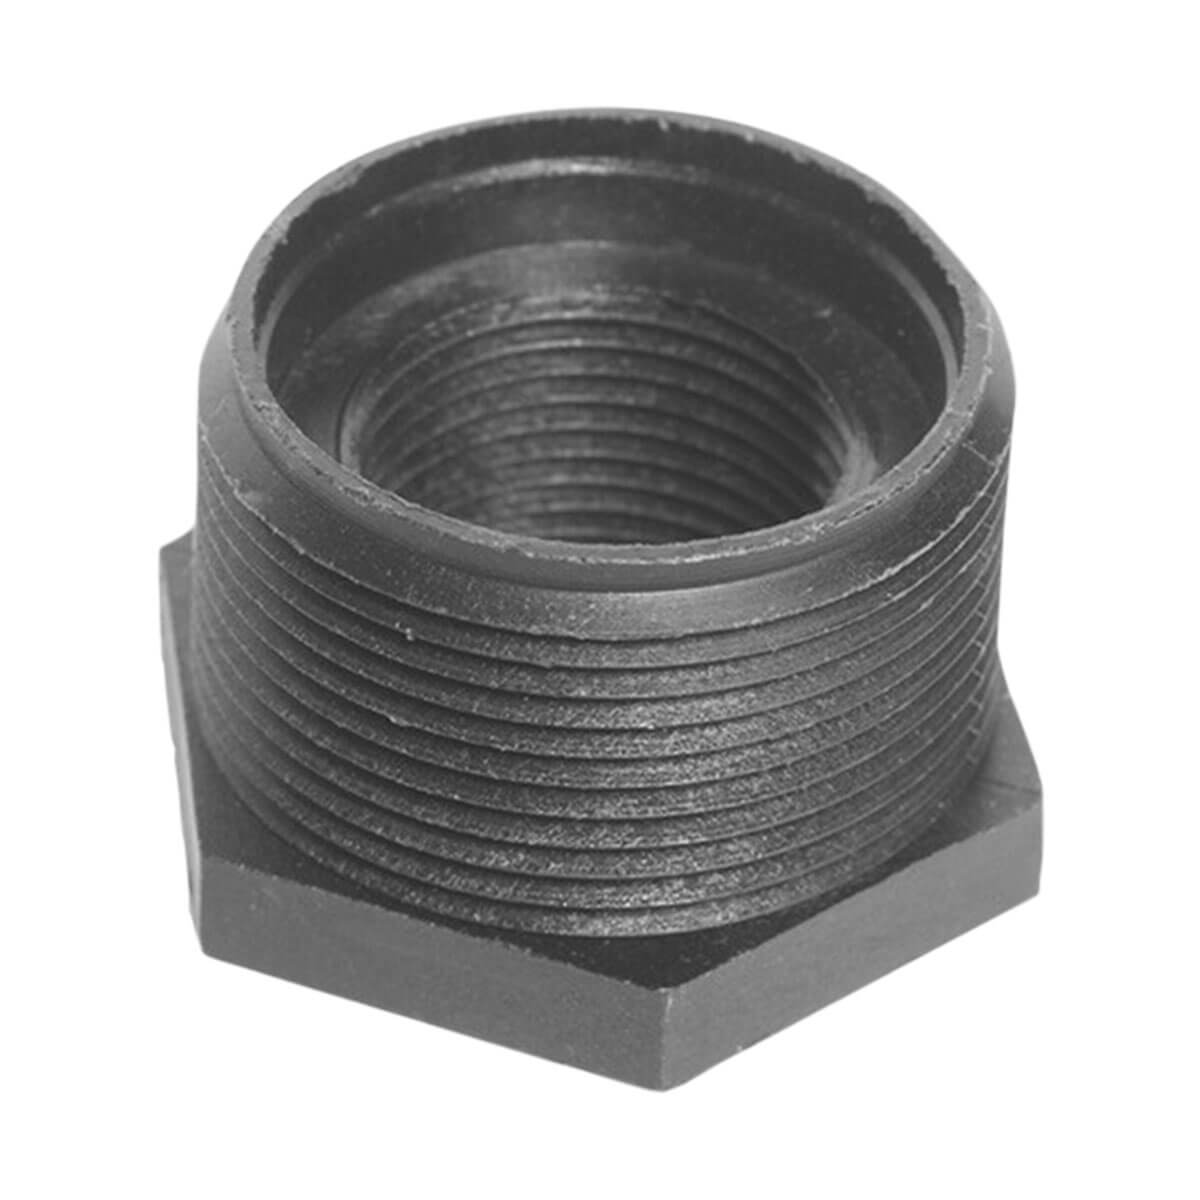 Reducer Bushings MPT x FPT - 1-1/4 x 3/4-in